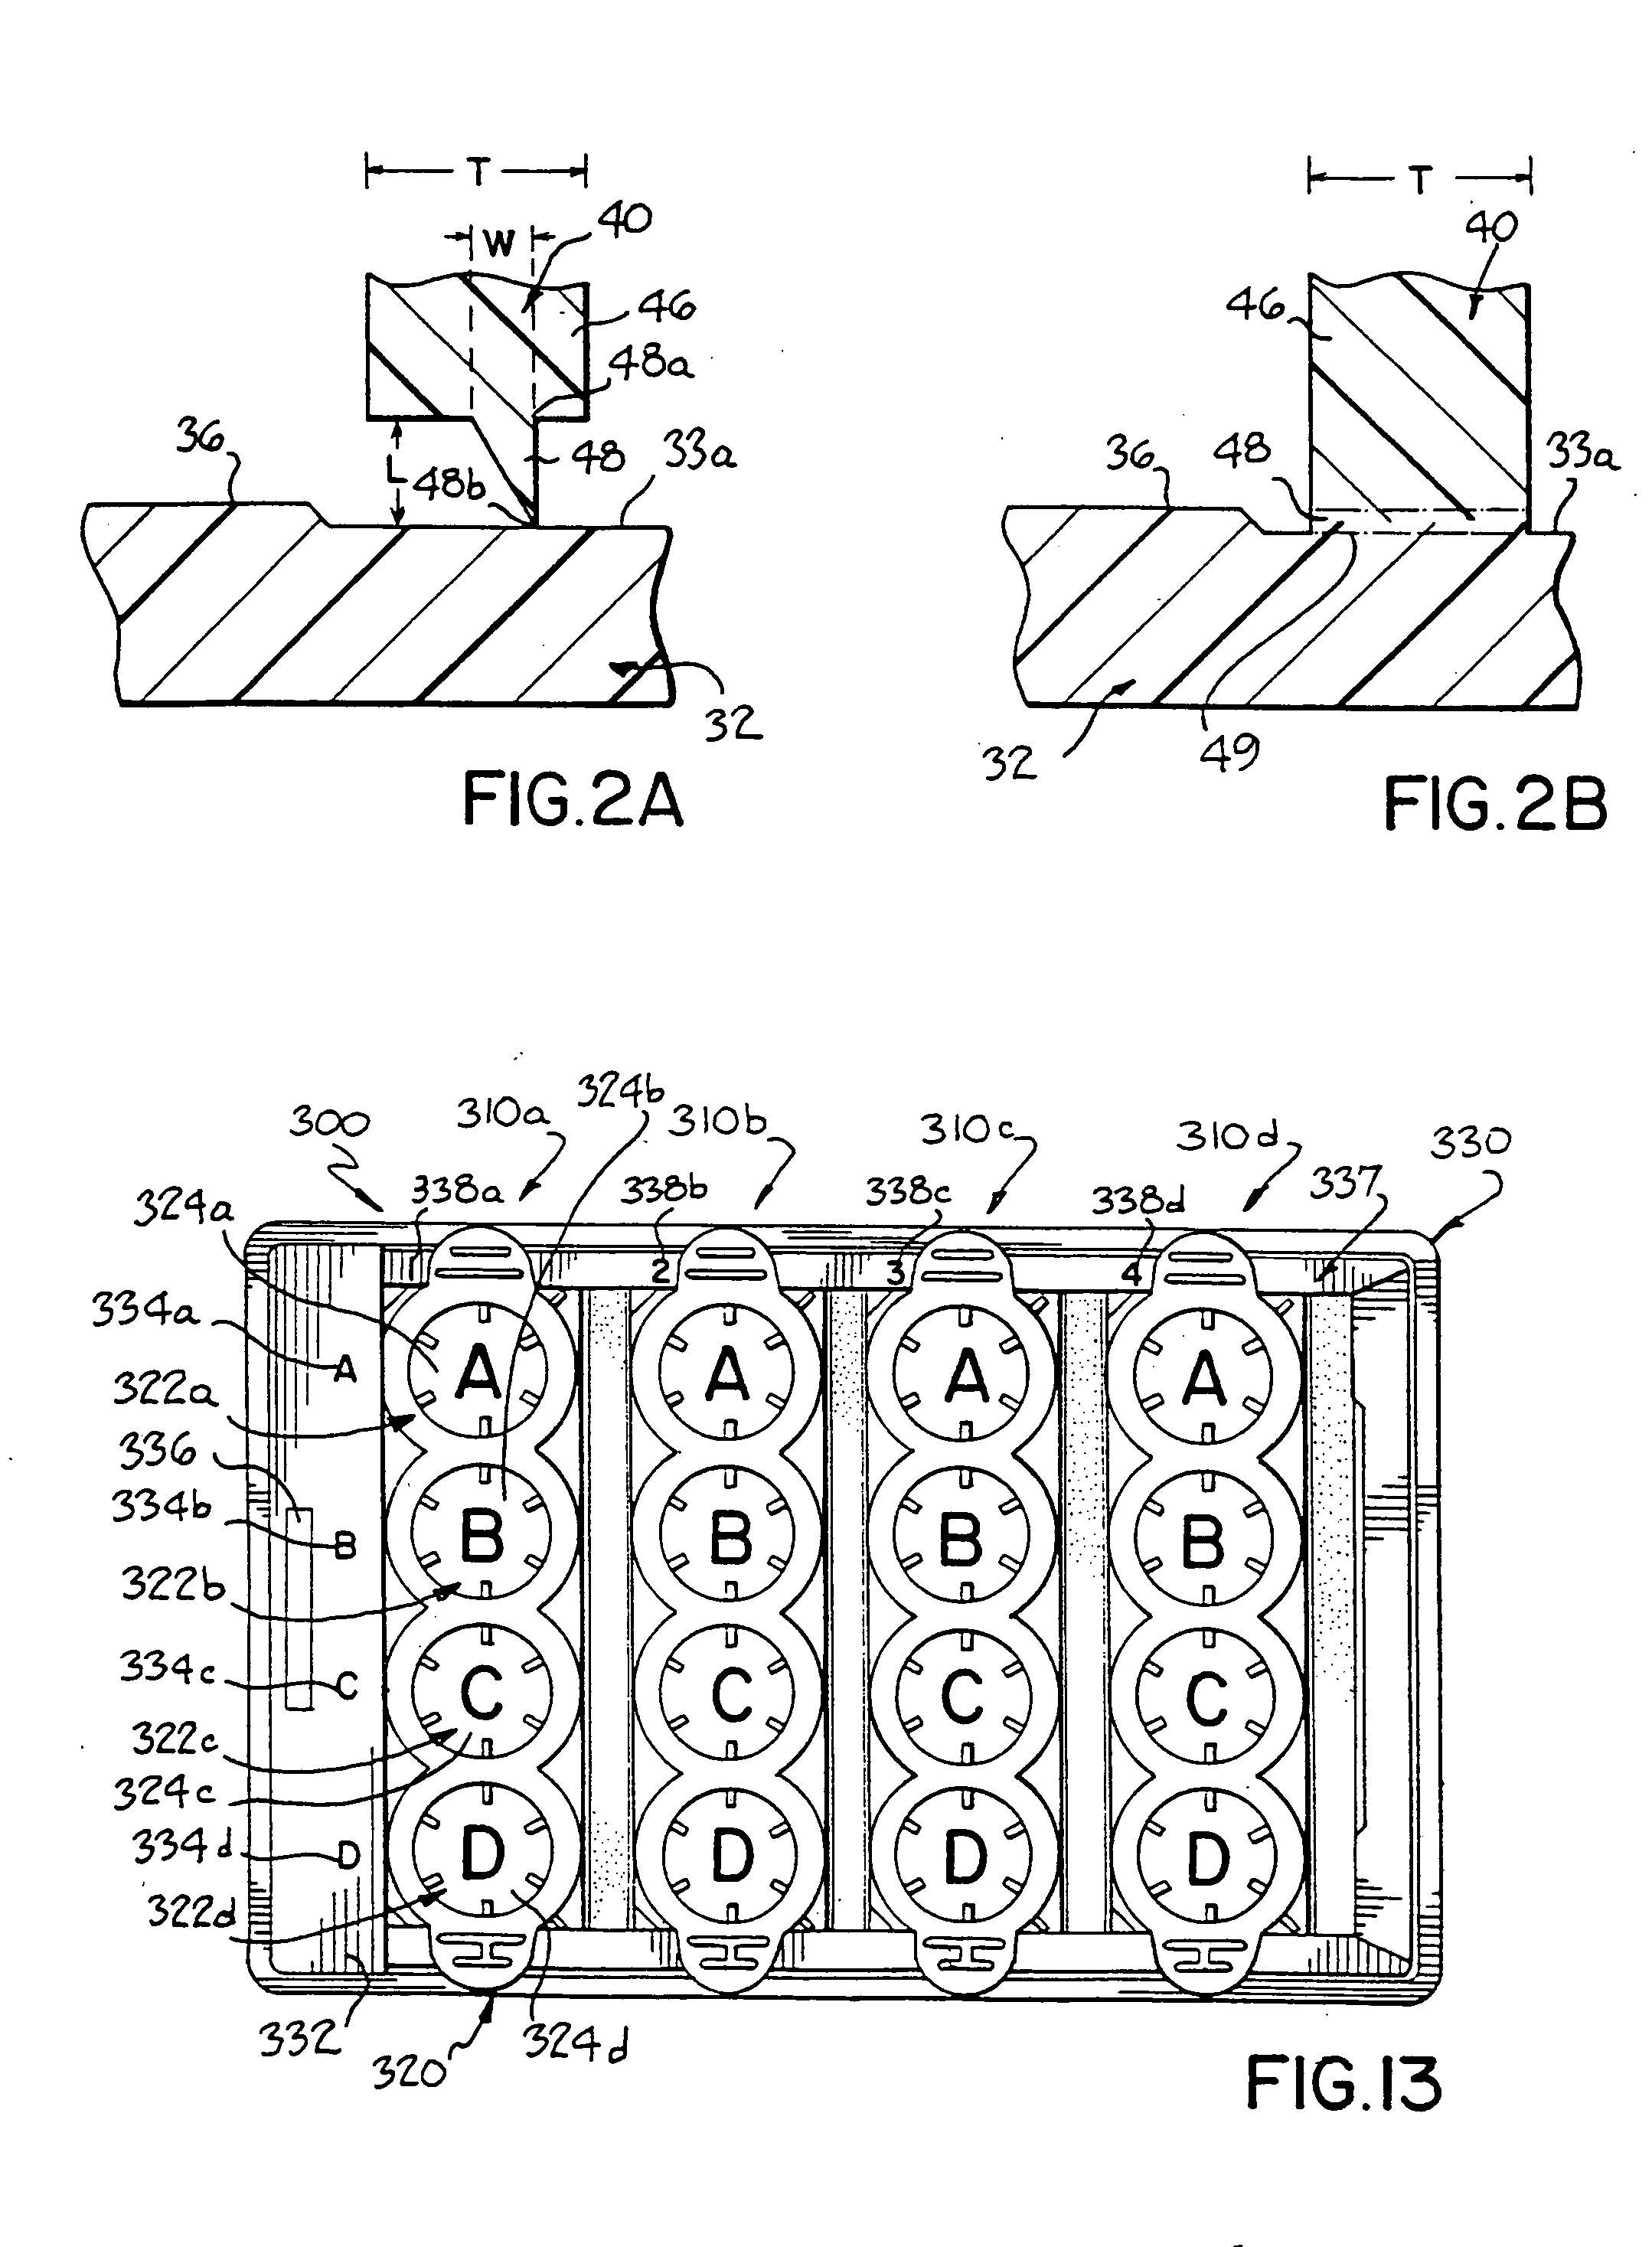 Multi-slide assembly including slide, frame and strip cap, and methods thereof